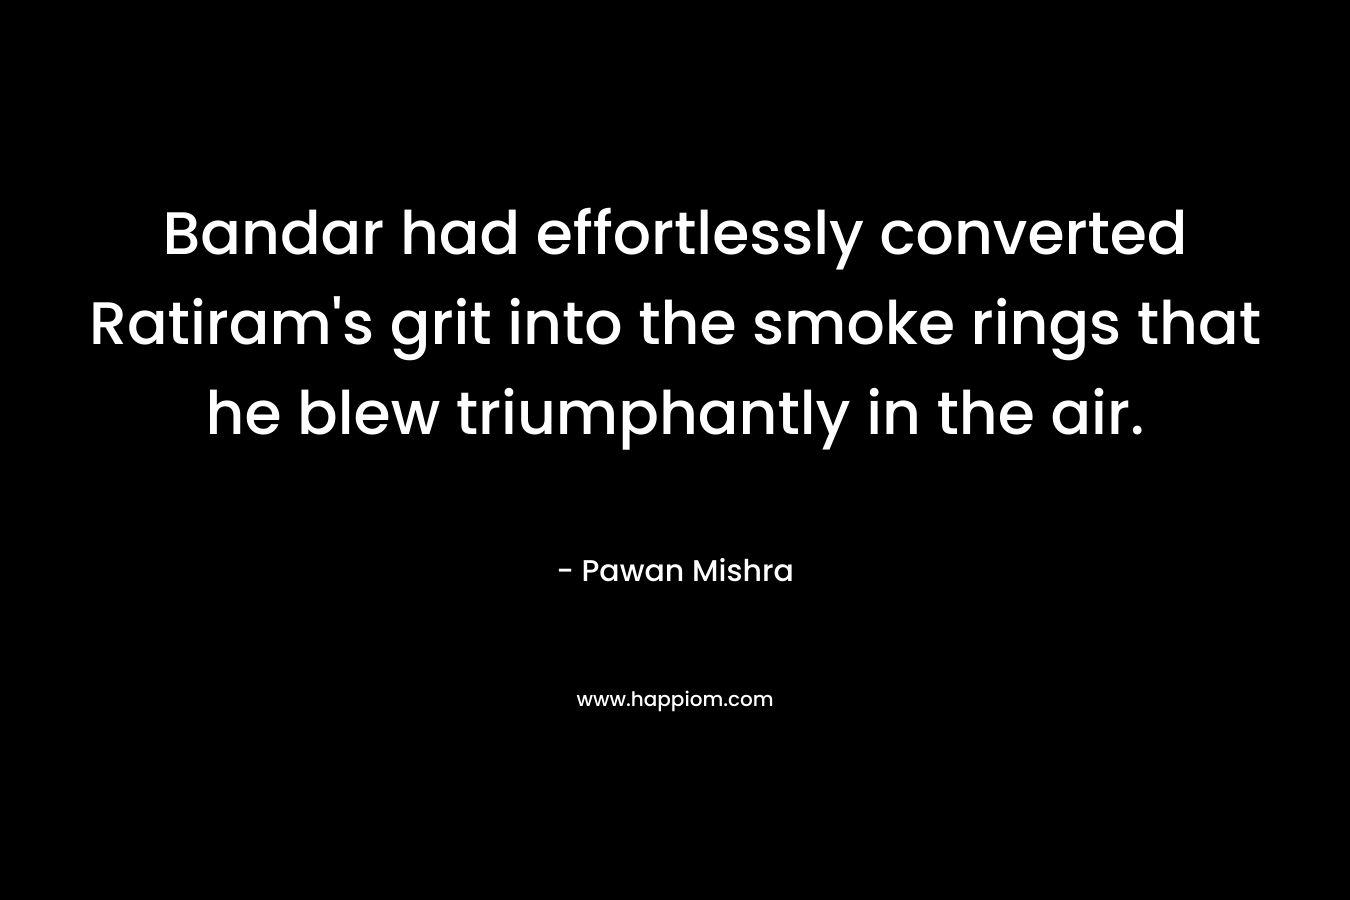 Bandar had effortlessly converted Ratiram’s grit into the smoke rings that he blew triumphantly in the air. – Pawan Mishra